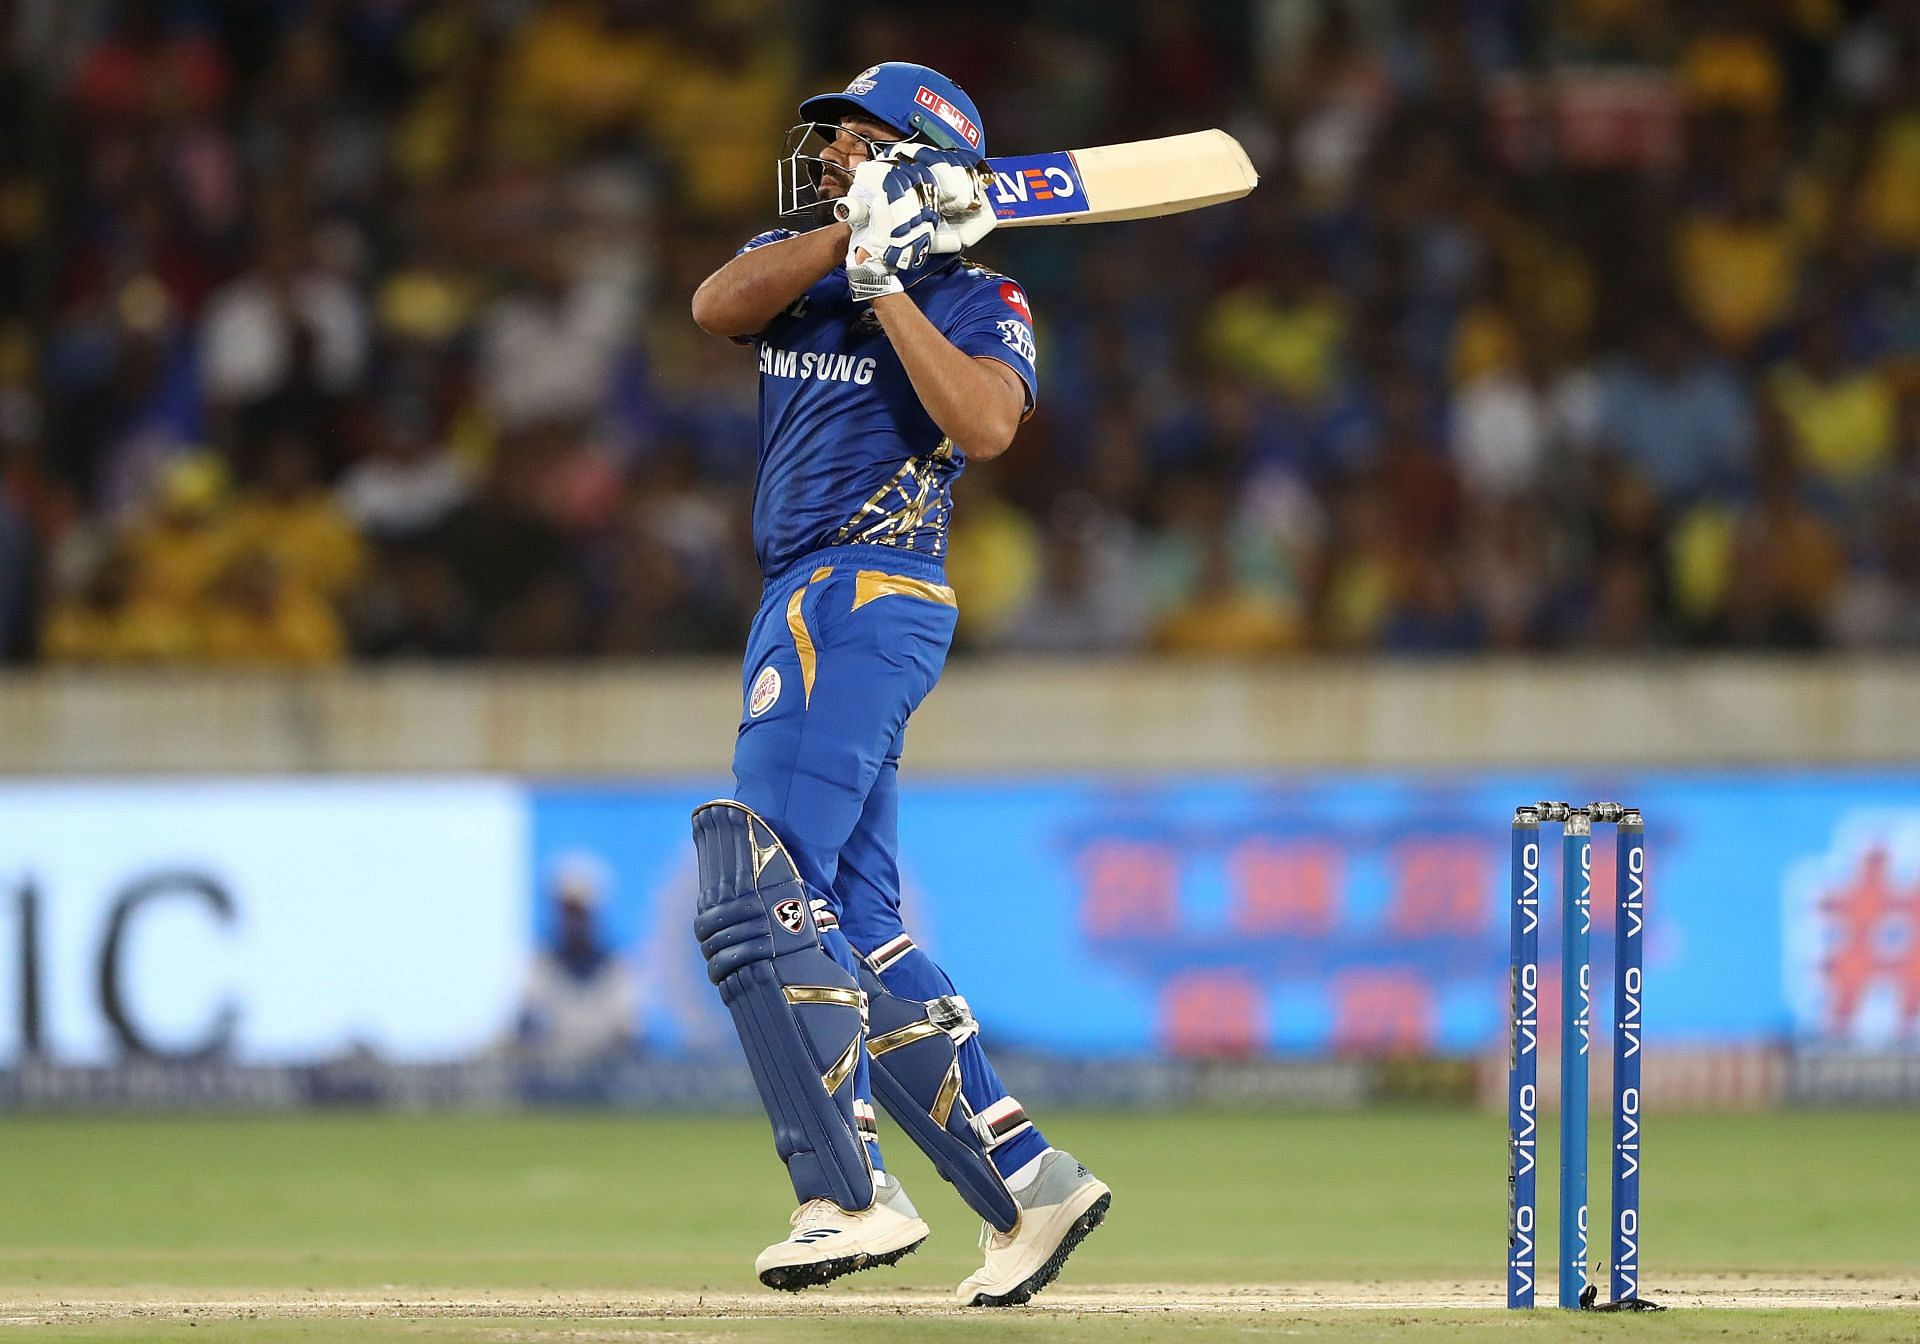 Rohit Sharma has struggled for form in IPL 2022